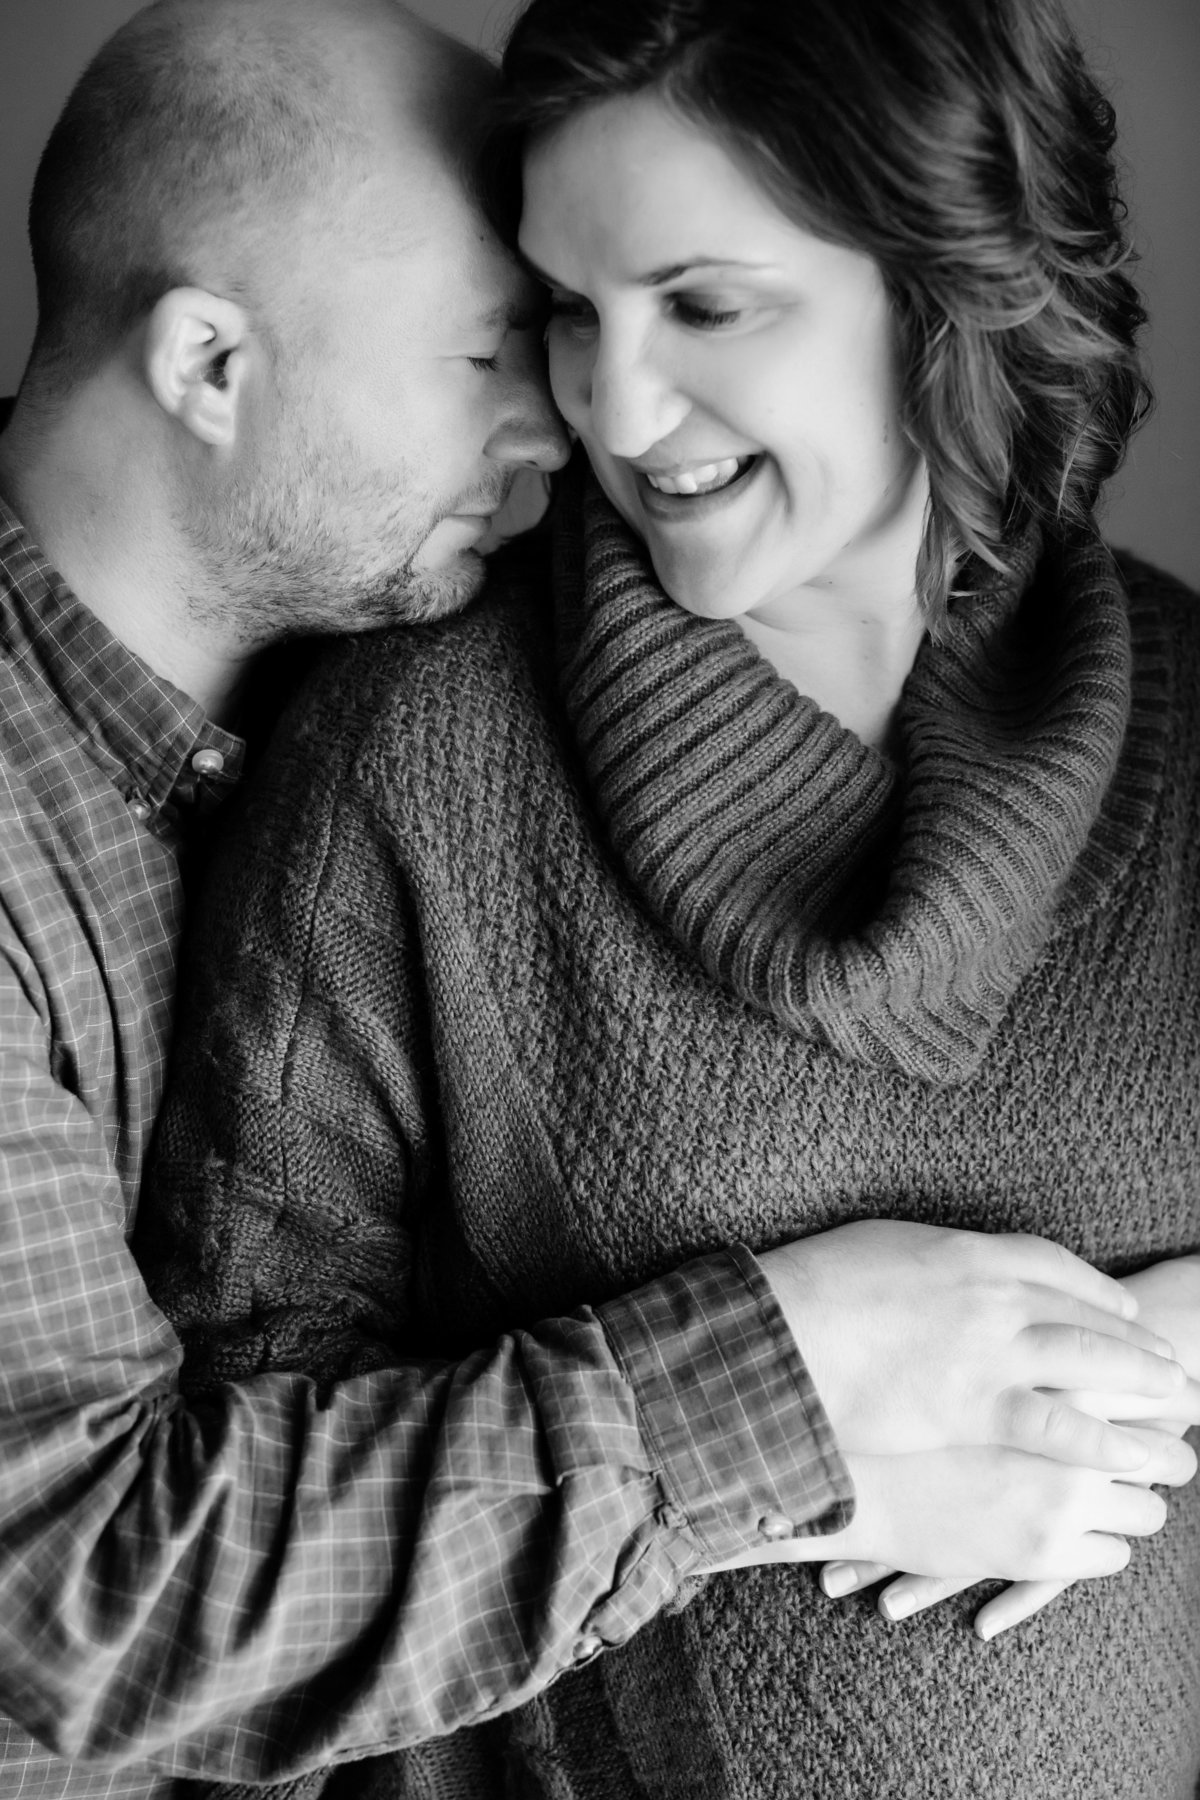 In home maternity session in winter - Jen Madigan - Naperville IL Maternity Photography